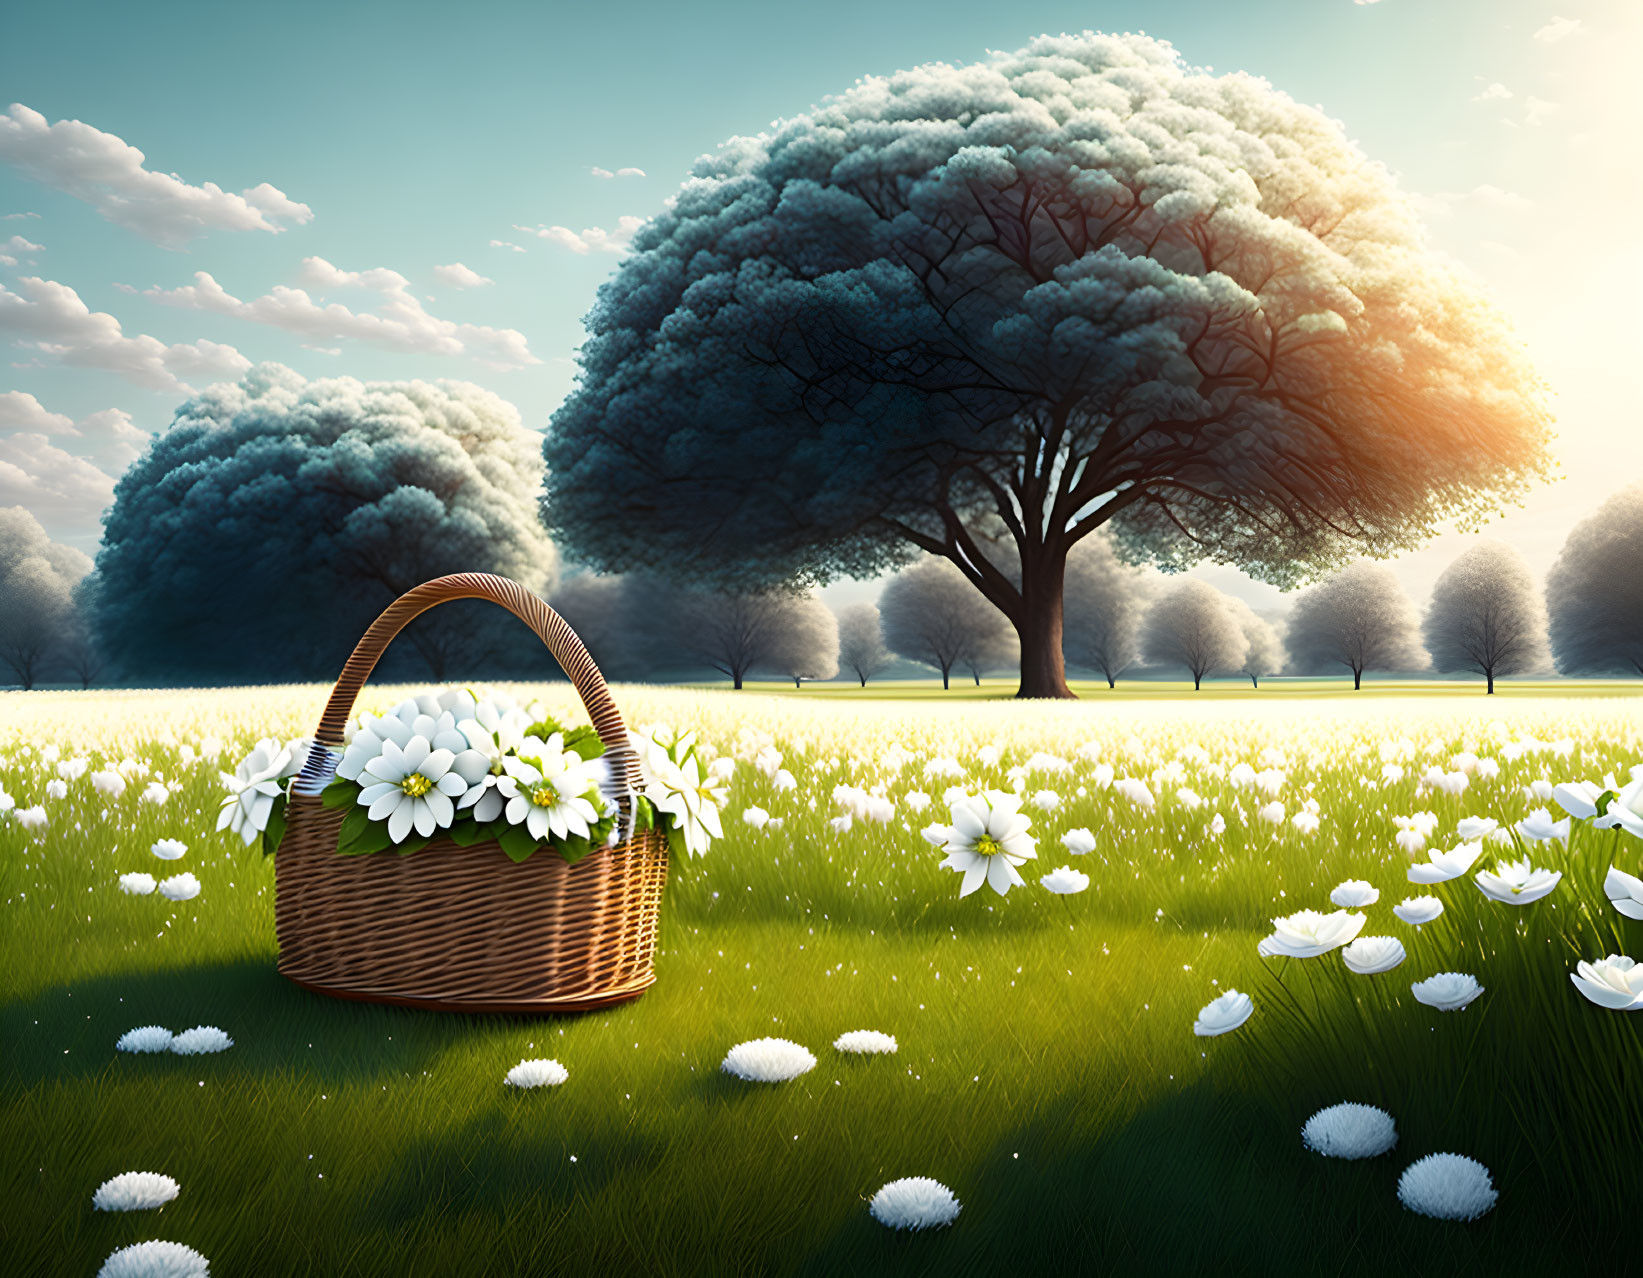 Tranquil field scene with large tree, sunlight, and flowers in wicker basket